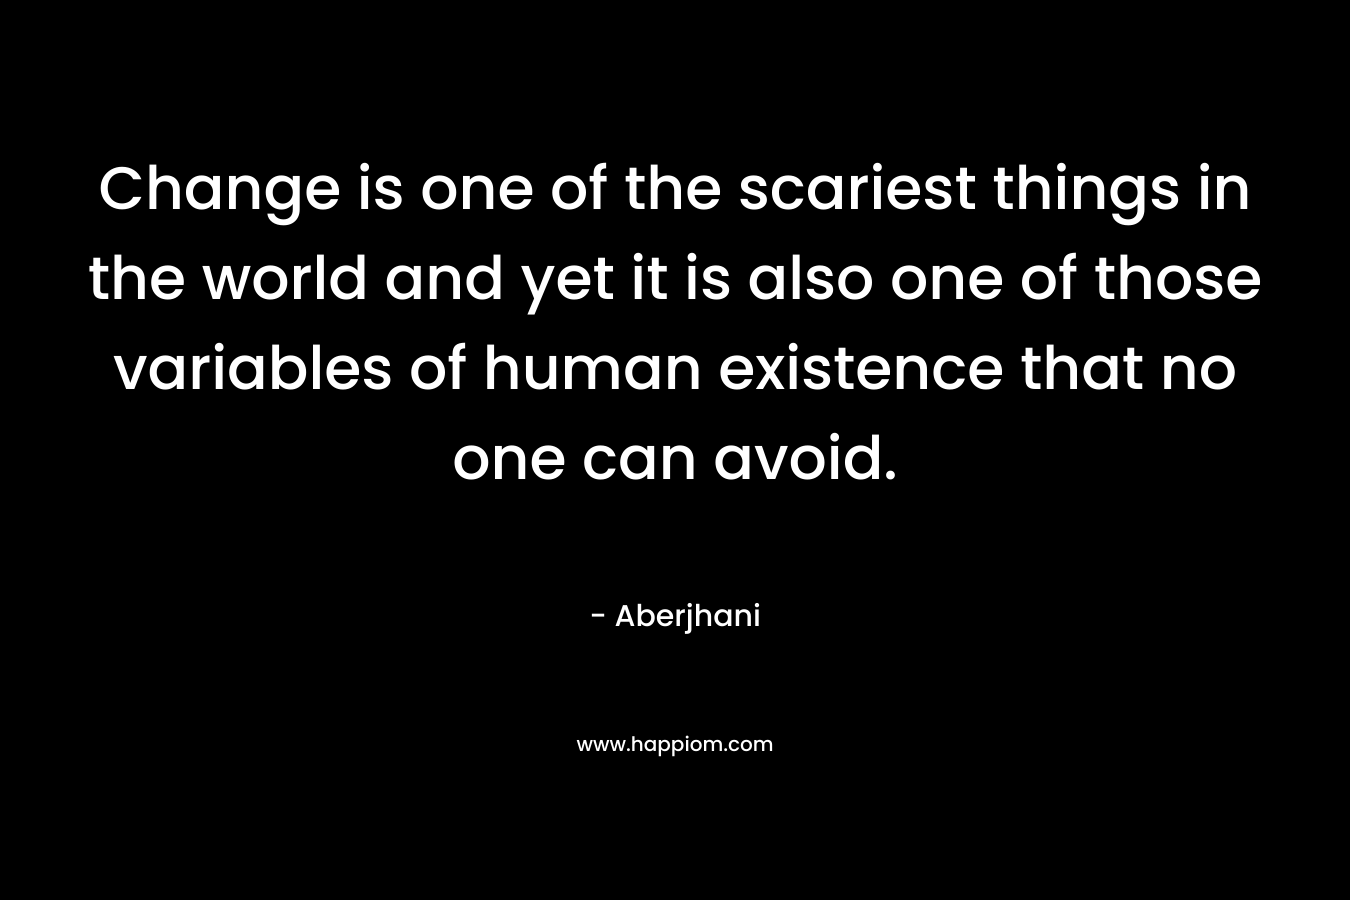 Change is one of the scariest things in the world and yet it is also one of those variables of human existence that no one can avoid. – Aberjhani